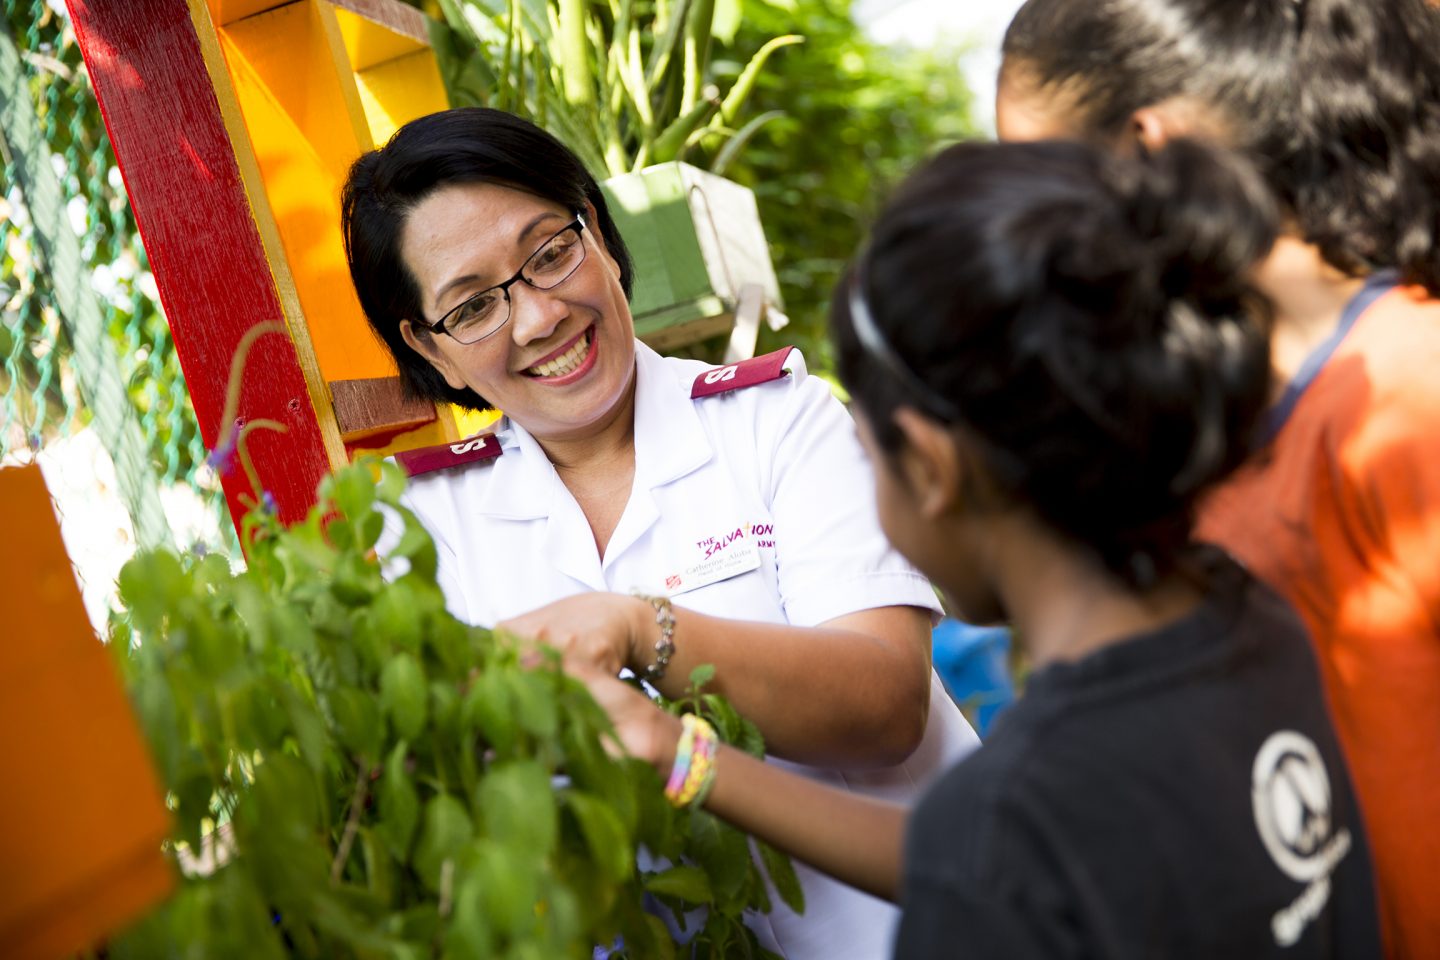 The Salvation Army's Family Support Services was the first welfare programme to be established in Singapore. Photo courtesy of Salvation Army Singapore.